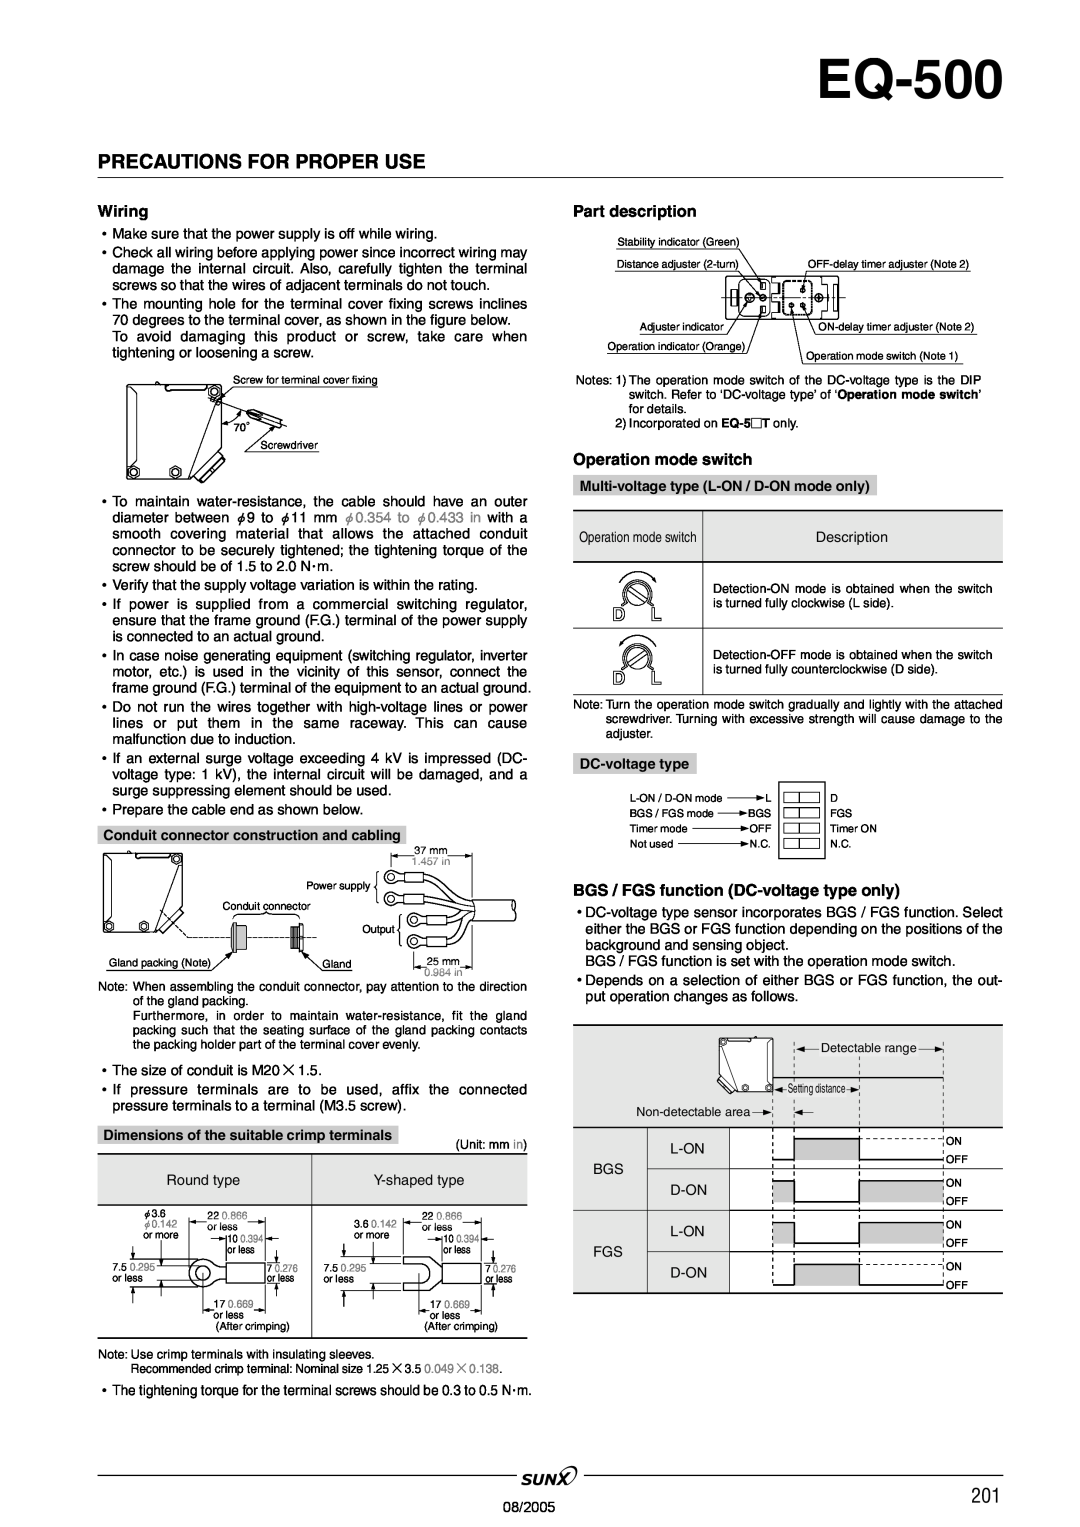 Panasonic EQ-500 Series manual Precautions For Proper Use, Wiring, Part description, Operation mode switch, DC-voltagetype 